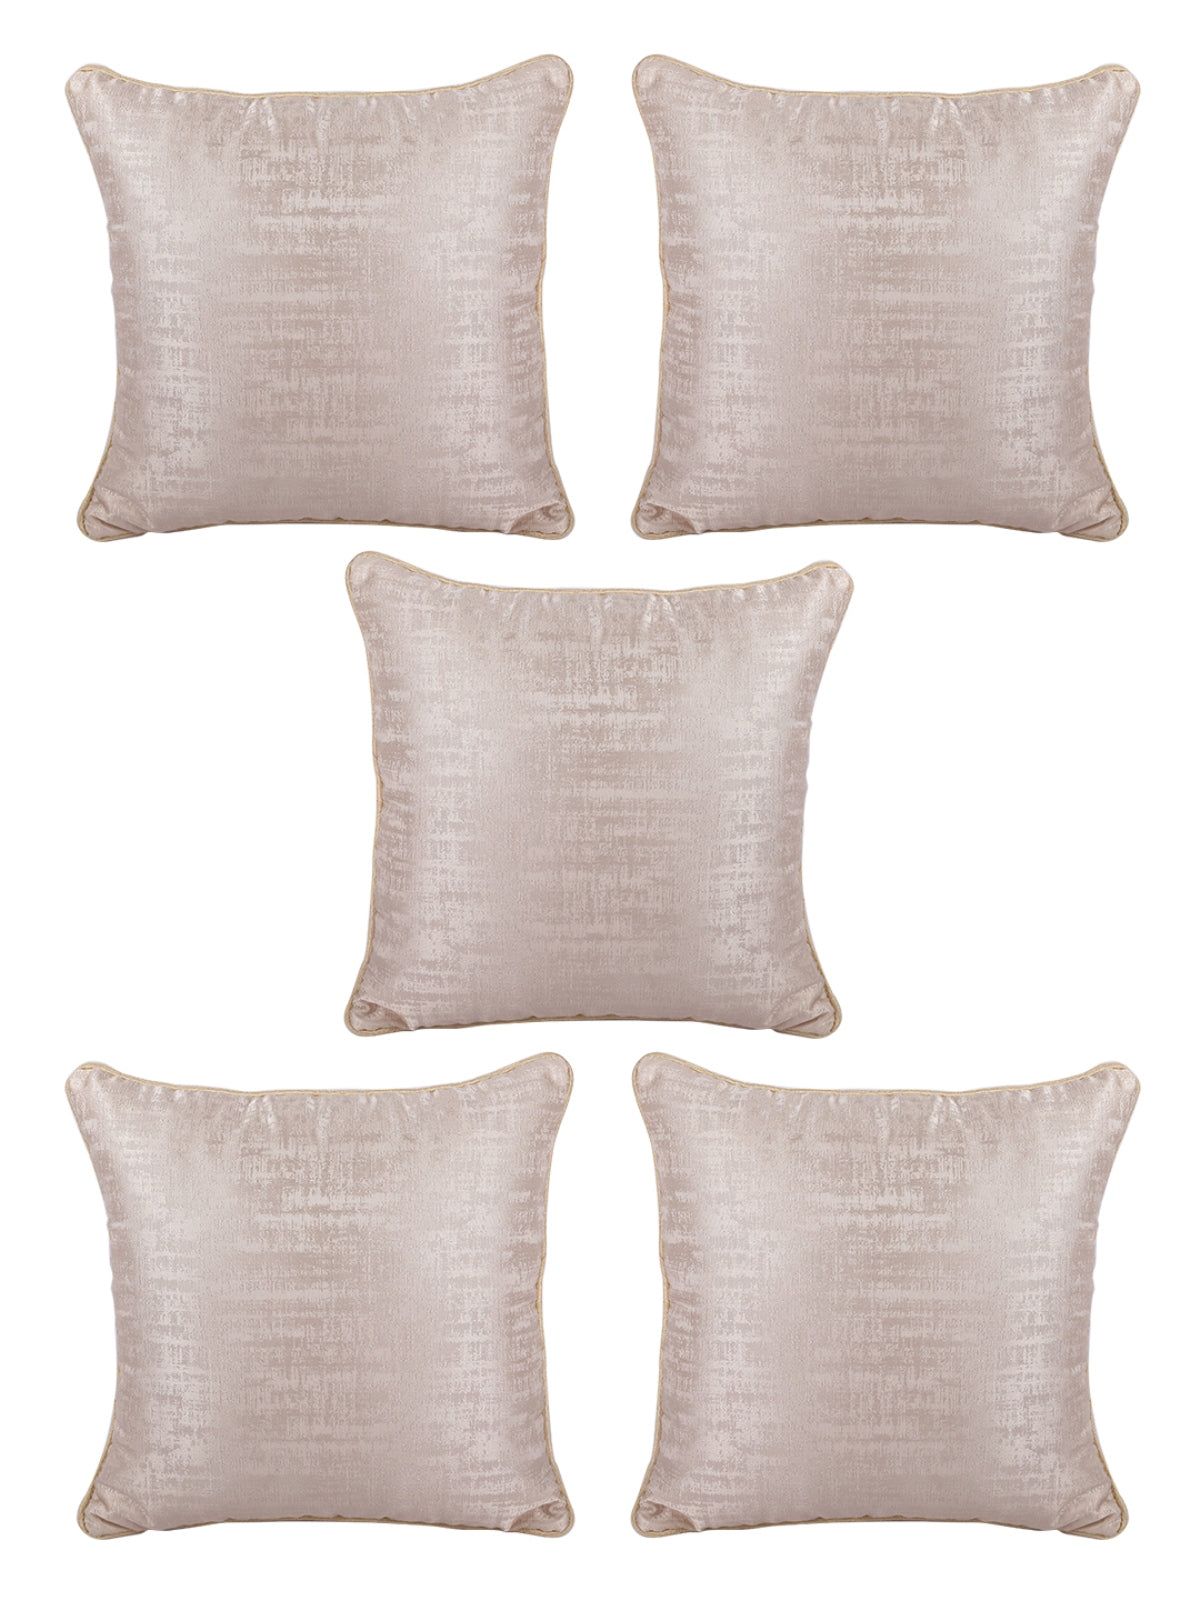 Beige Set of 5 Jacquard 16 Inch x 16 Inch Cushion Covers